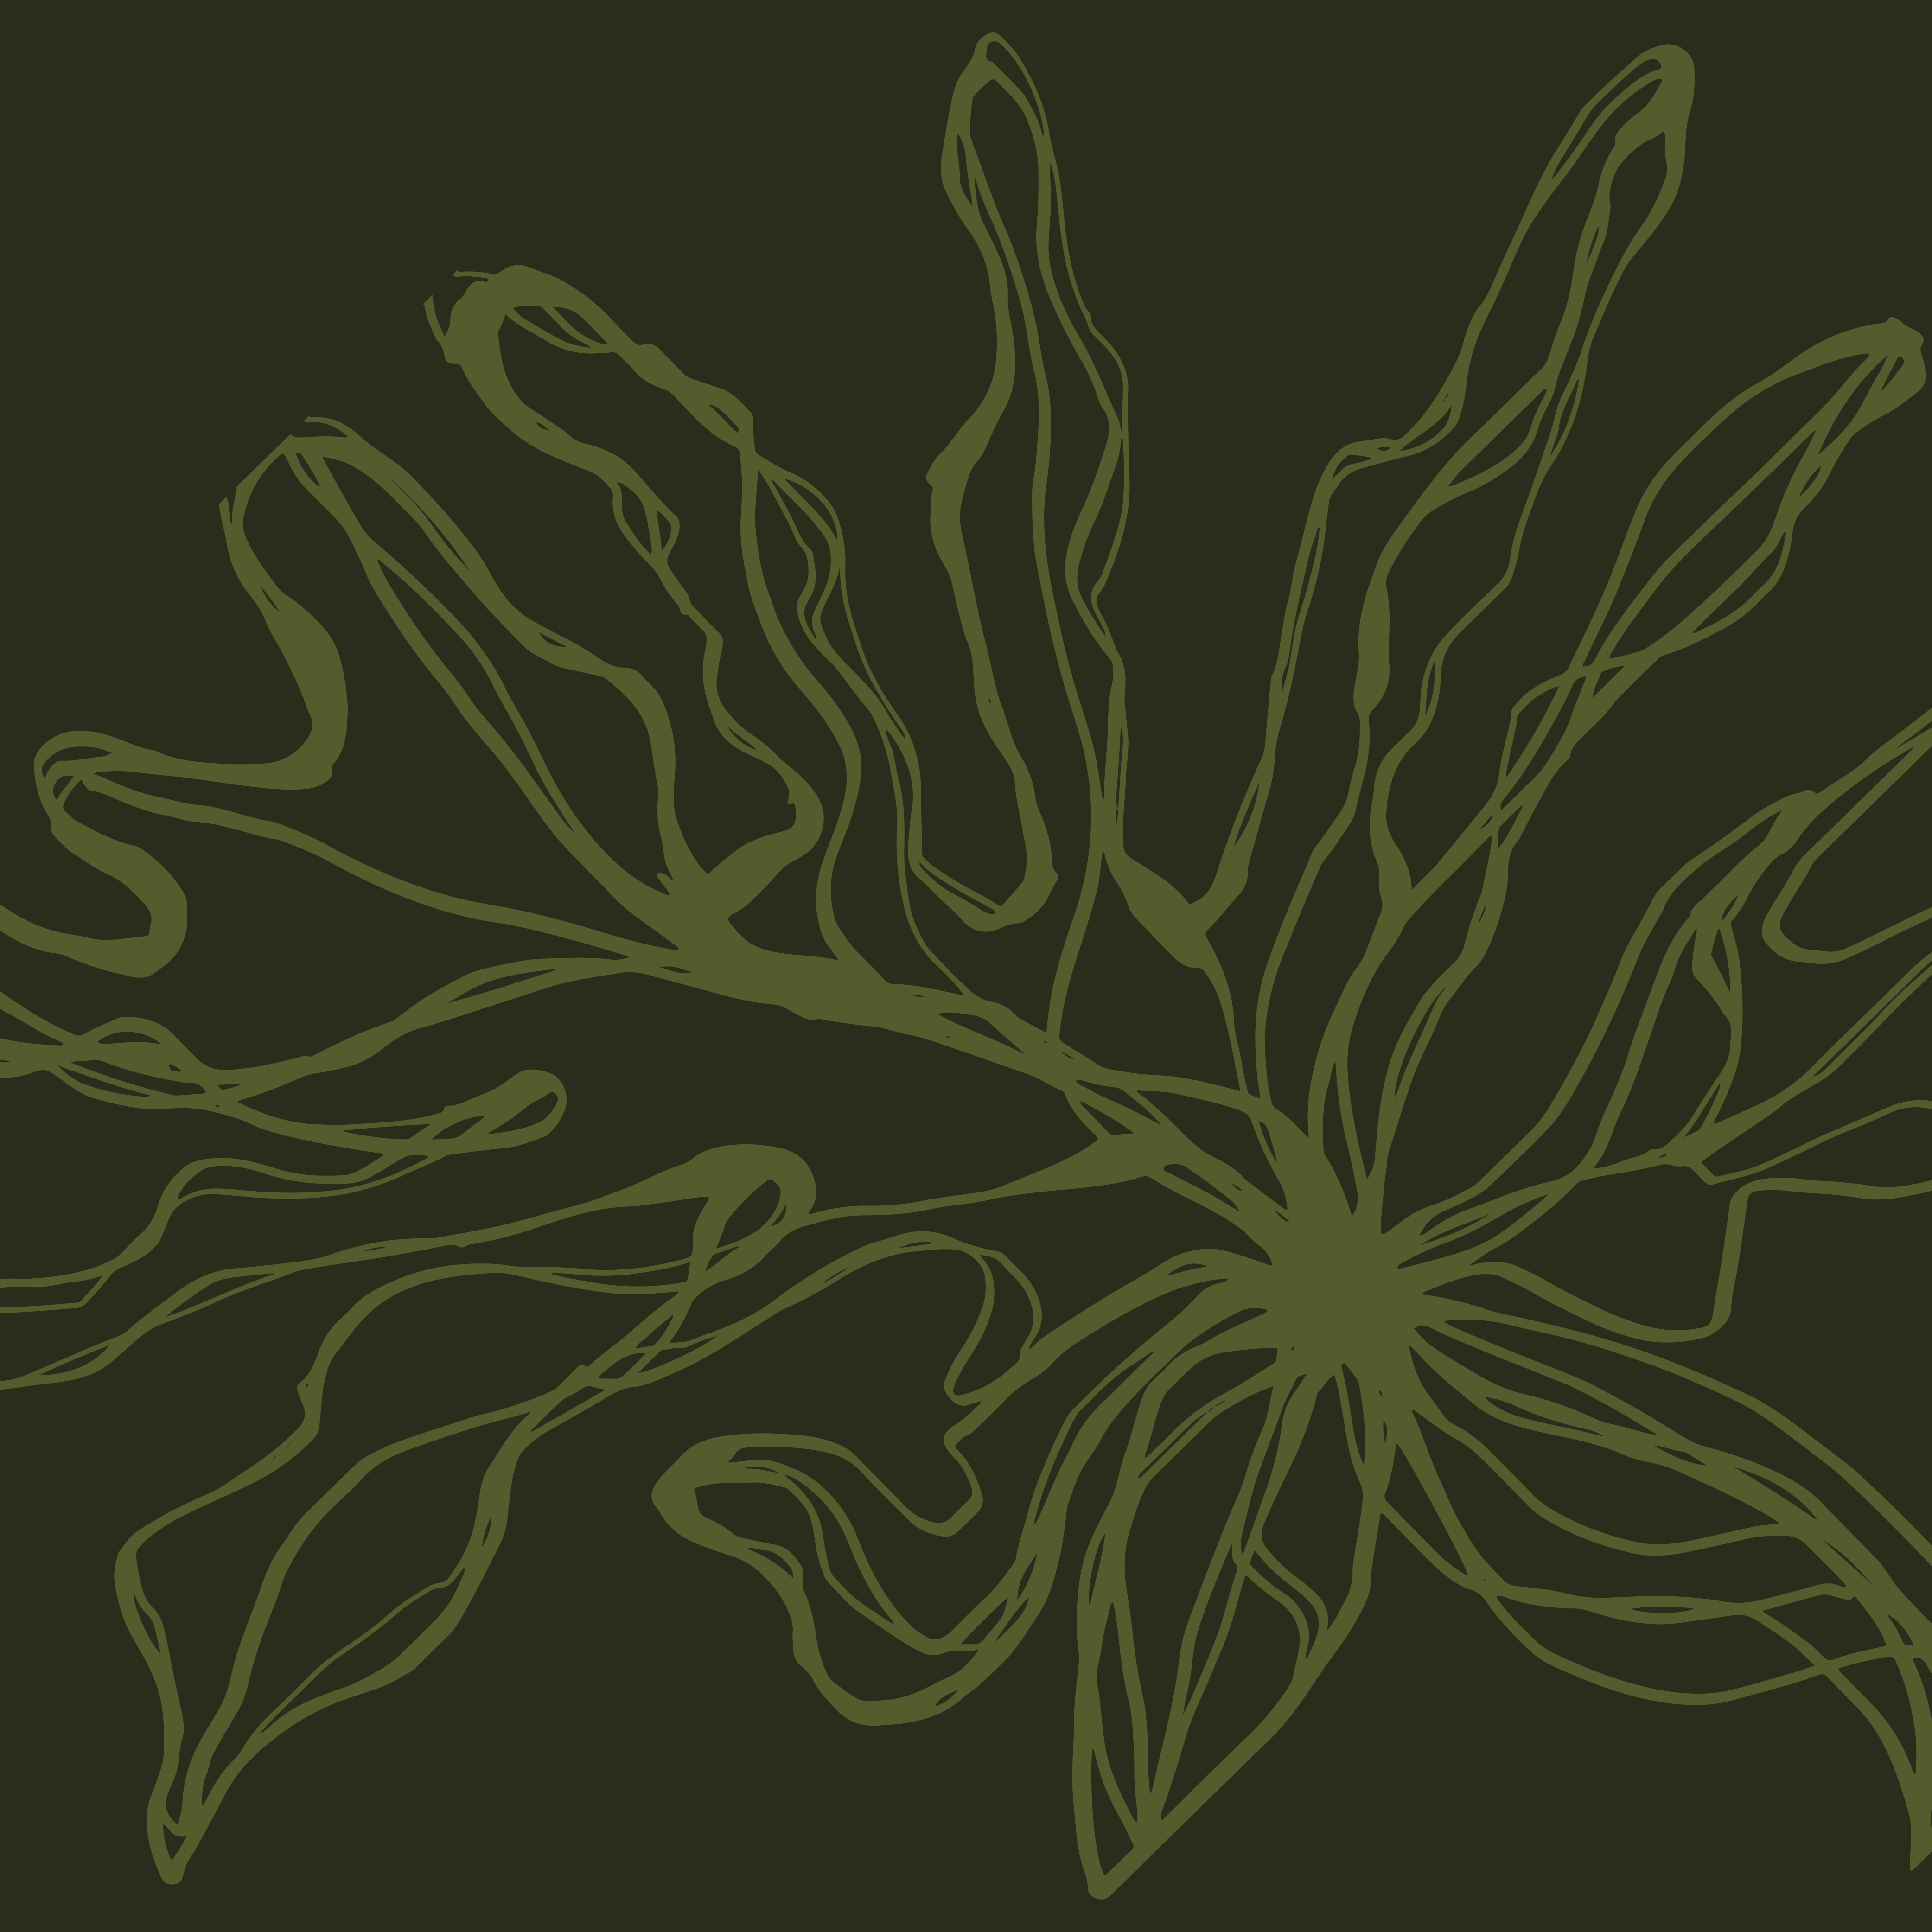 one of the brand's illustrated plant options in light green, with a darker green background